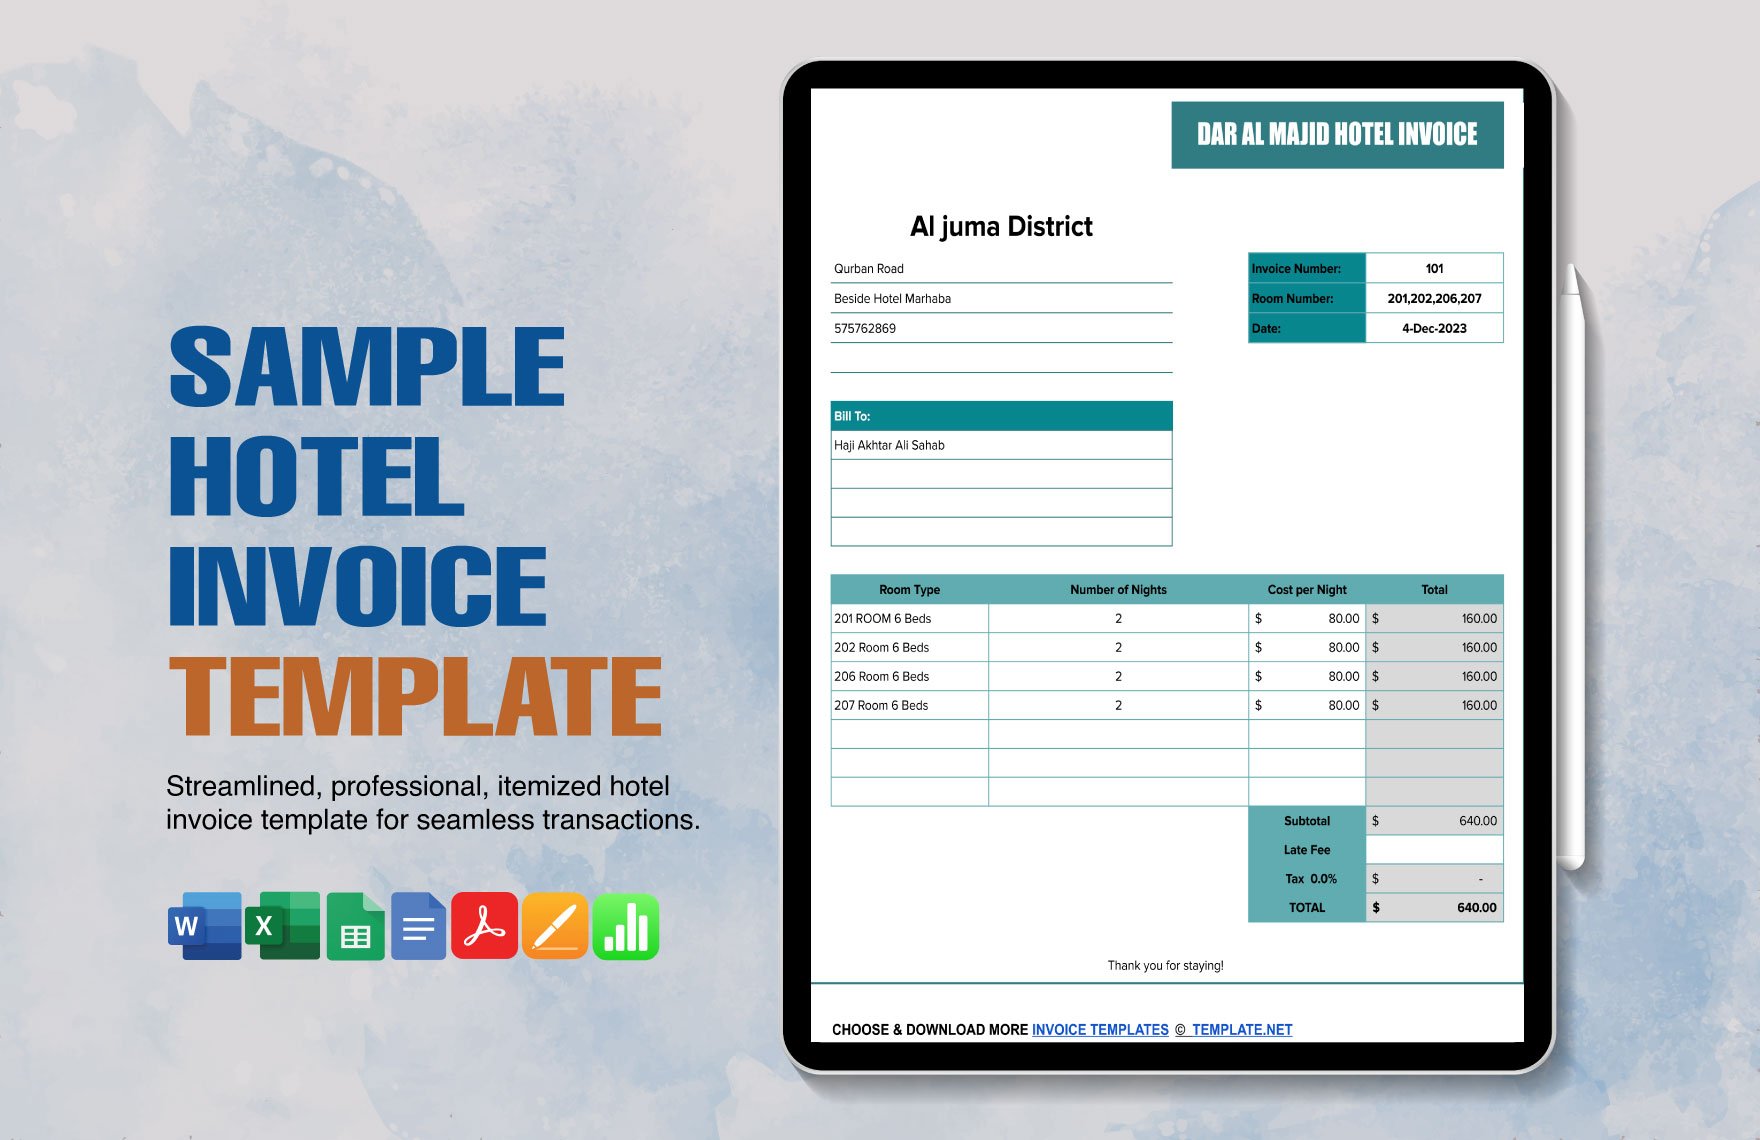 Free Sample Hotel Invoice Template in Word, Google Docs, Excel, PDF, Google Sheets, Apple Pages, Apple Numbers